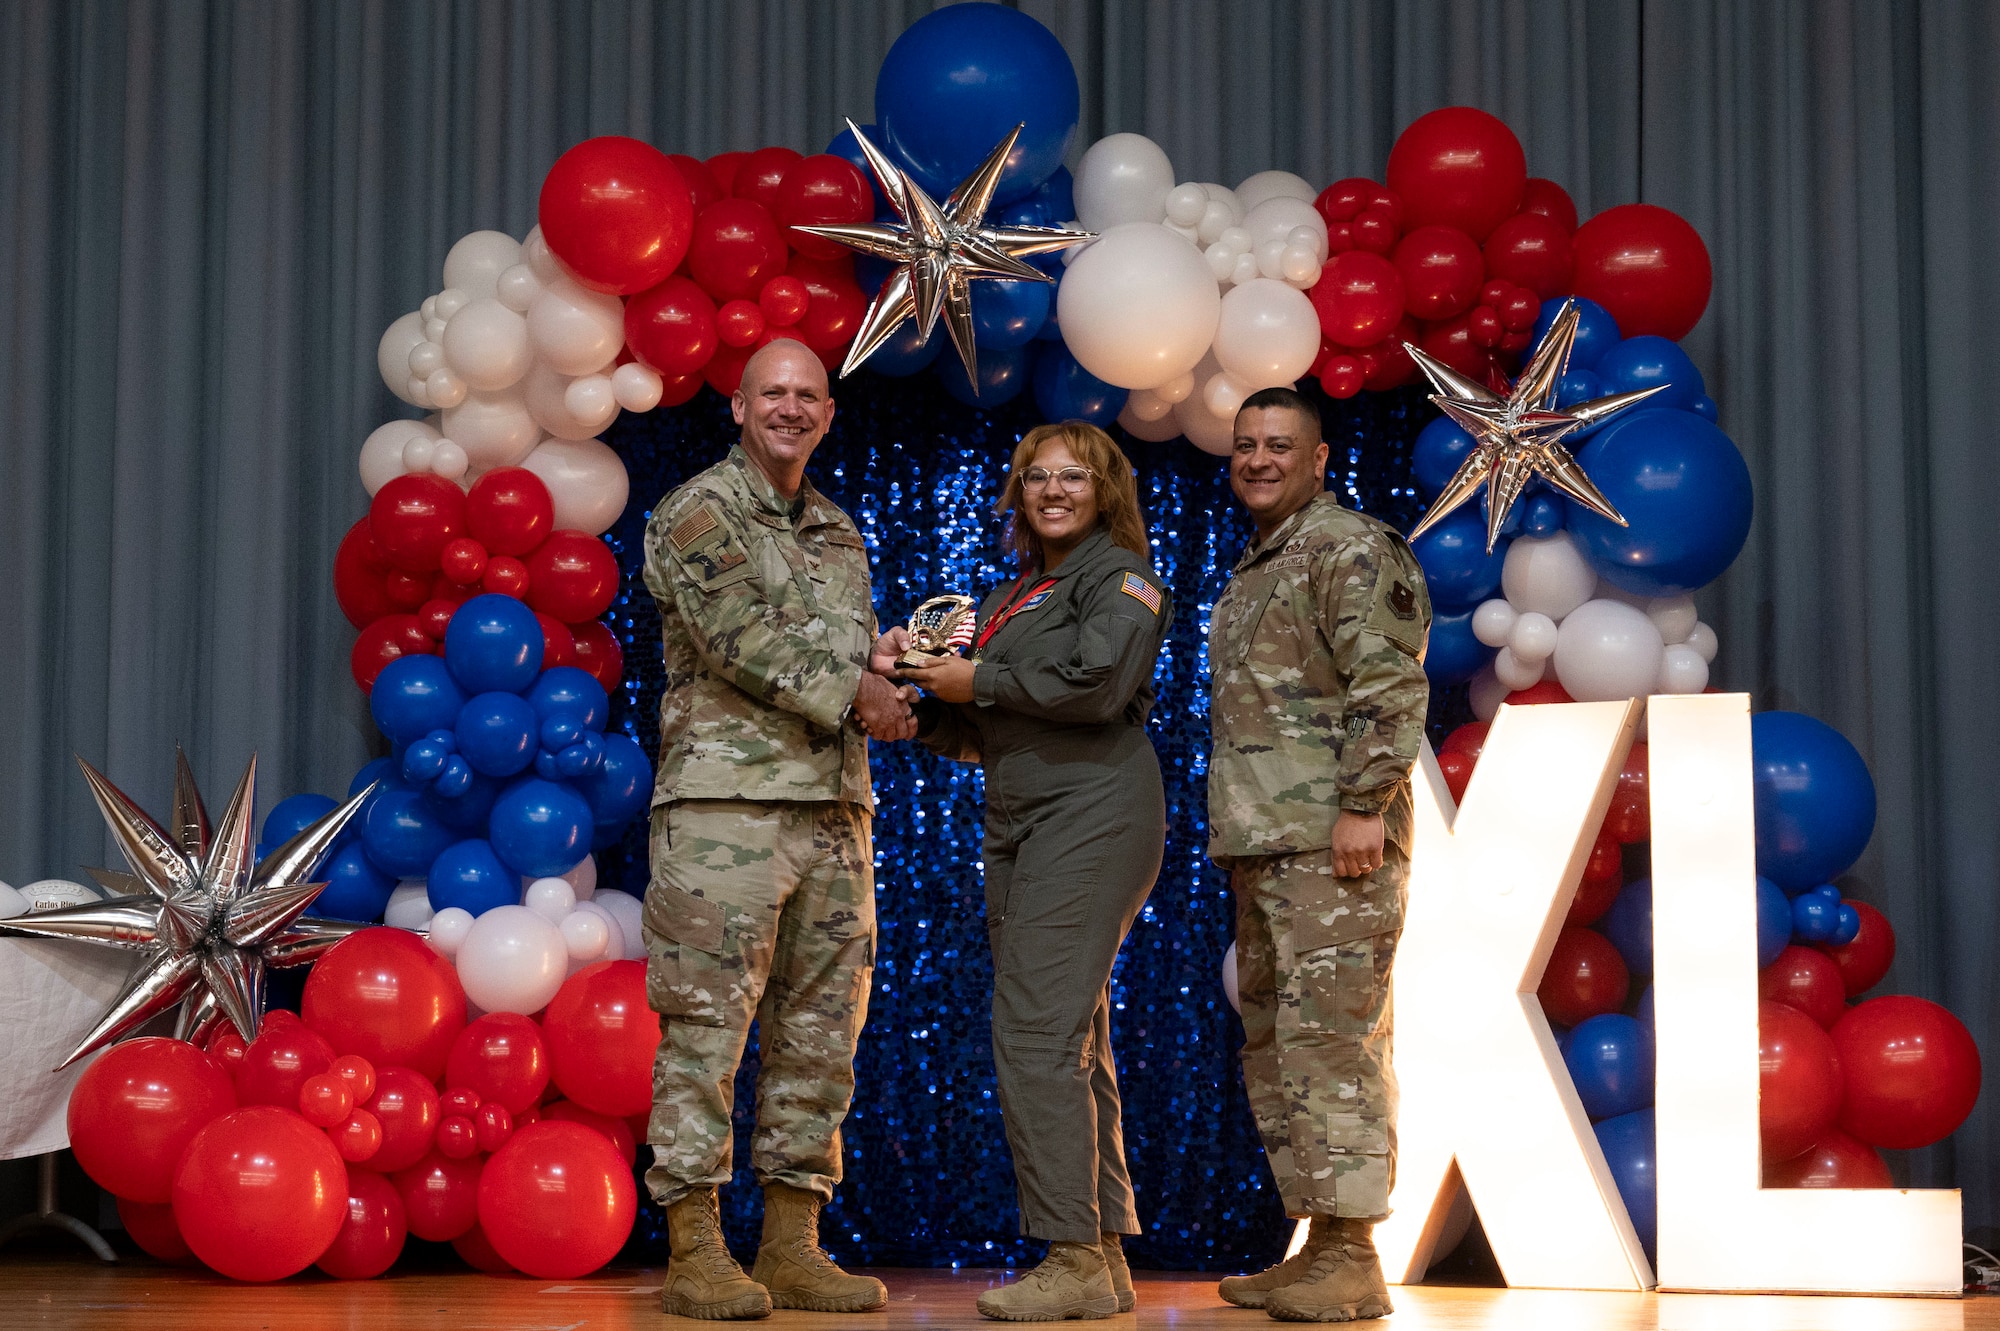 U.S. Air Force Col. Kevin Davidson, 47th Flying Training Wing (FTW) commander, and Chief Master Sgt. Lester Largaespada, 47th FTW command chief, present Senior Airman Jada Peters, 47th Operations Group, an award during the 2023 47th FTW Annual Awards Ceremony at Laughlin Air Force Base, Texas, Feb. 2, 2024. The annual awards recognized the top performers throughout the 47th Flying Training Wing during fiscal year 2023. (U.S. Air Force photo by Senior Airman Kailee Reynolds)